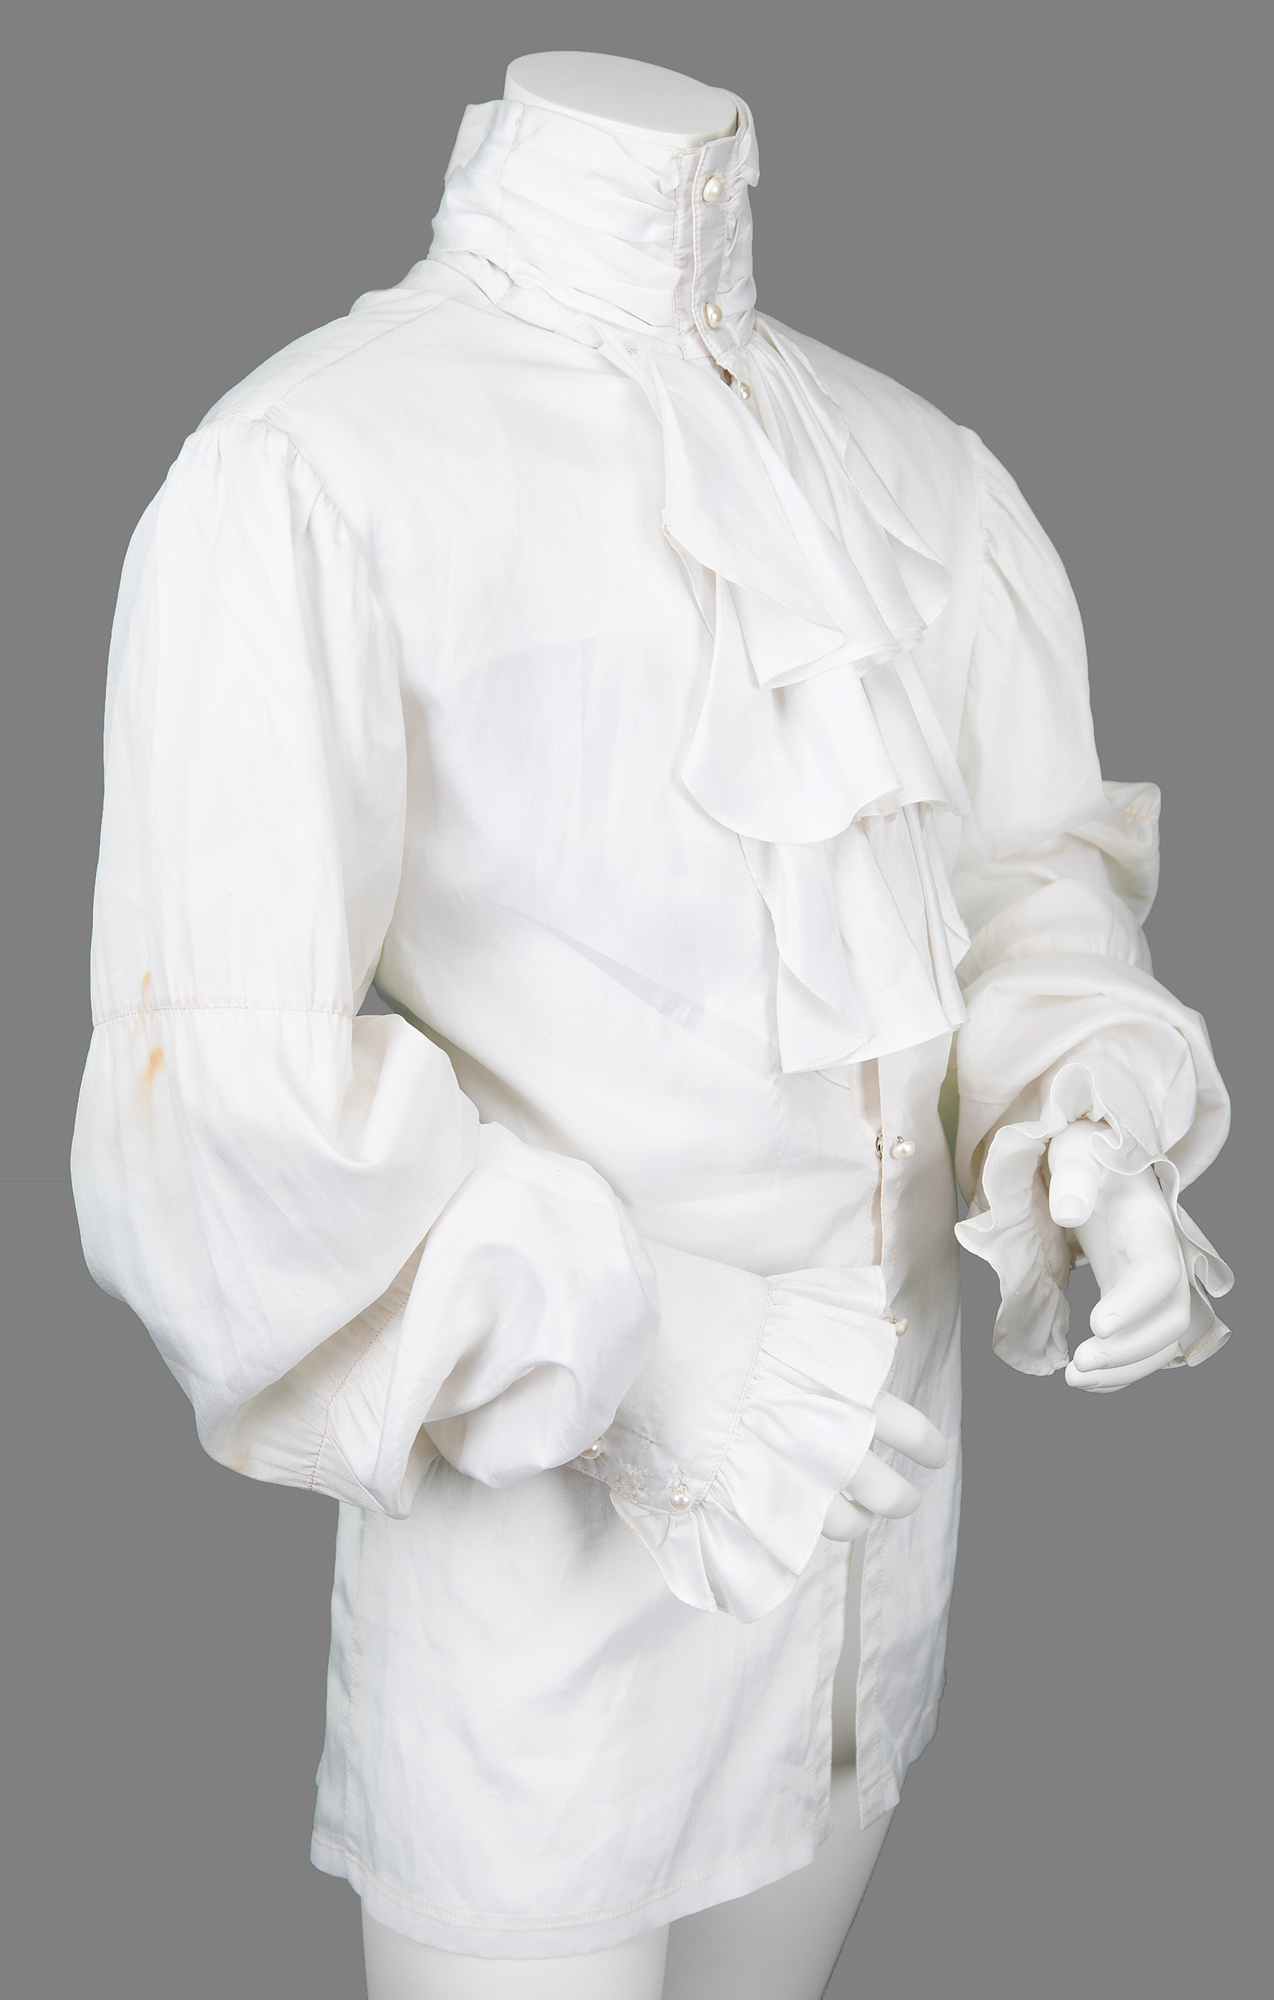 Prince's Stage-Worn White Ruffled Shirt from the 12th Annual